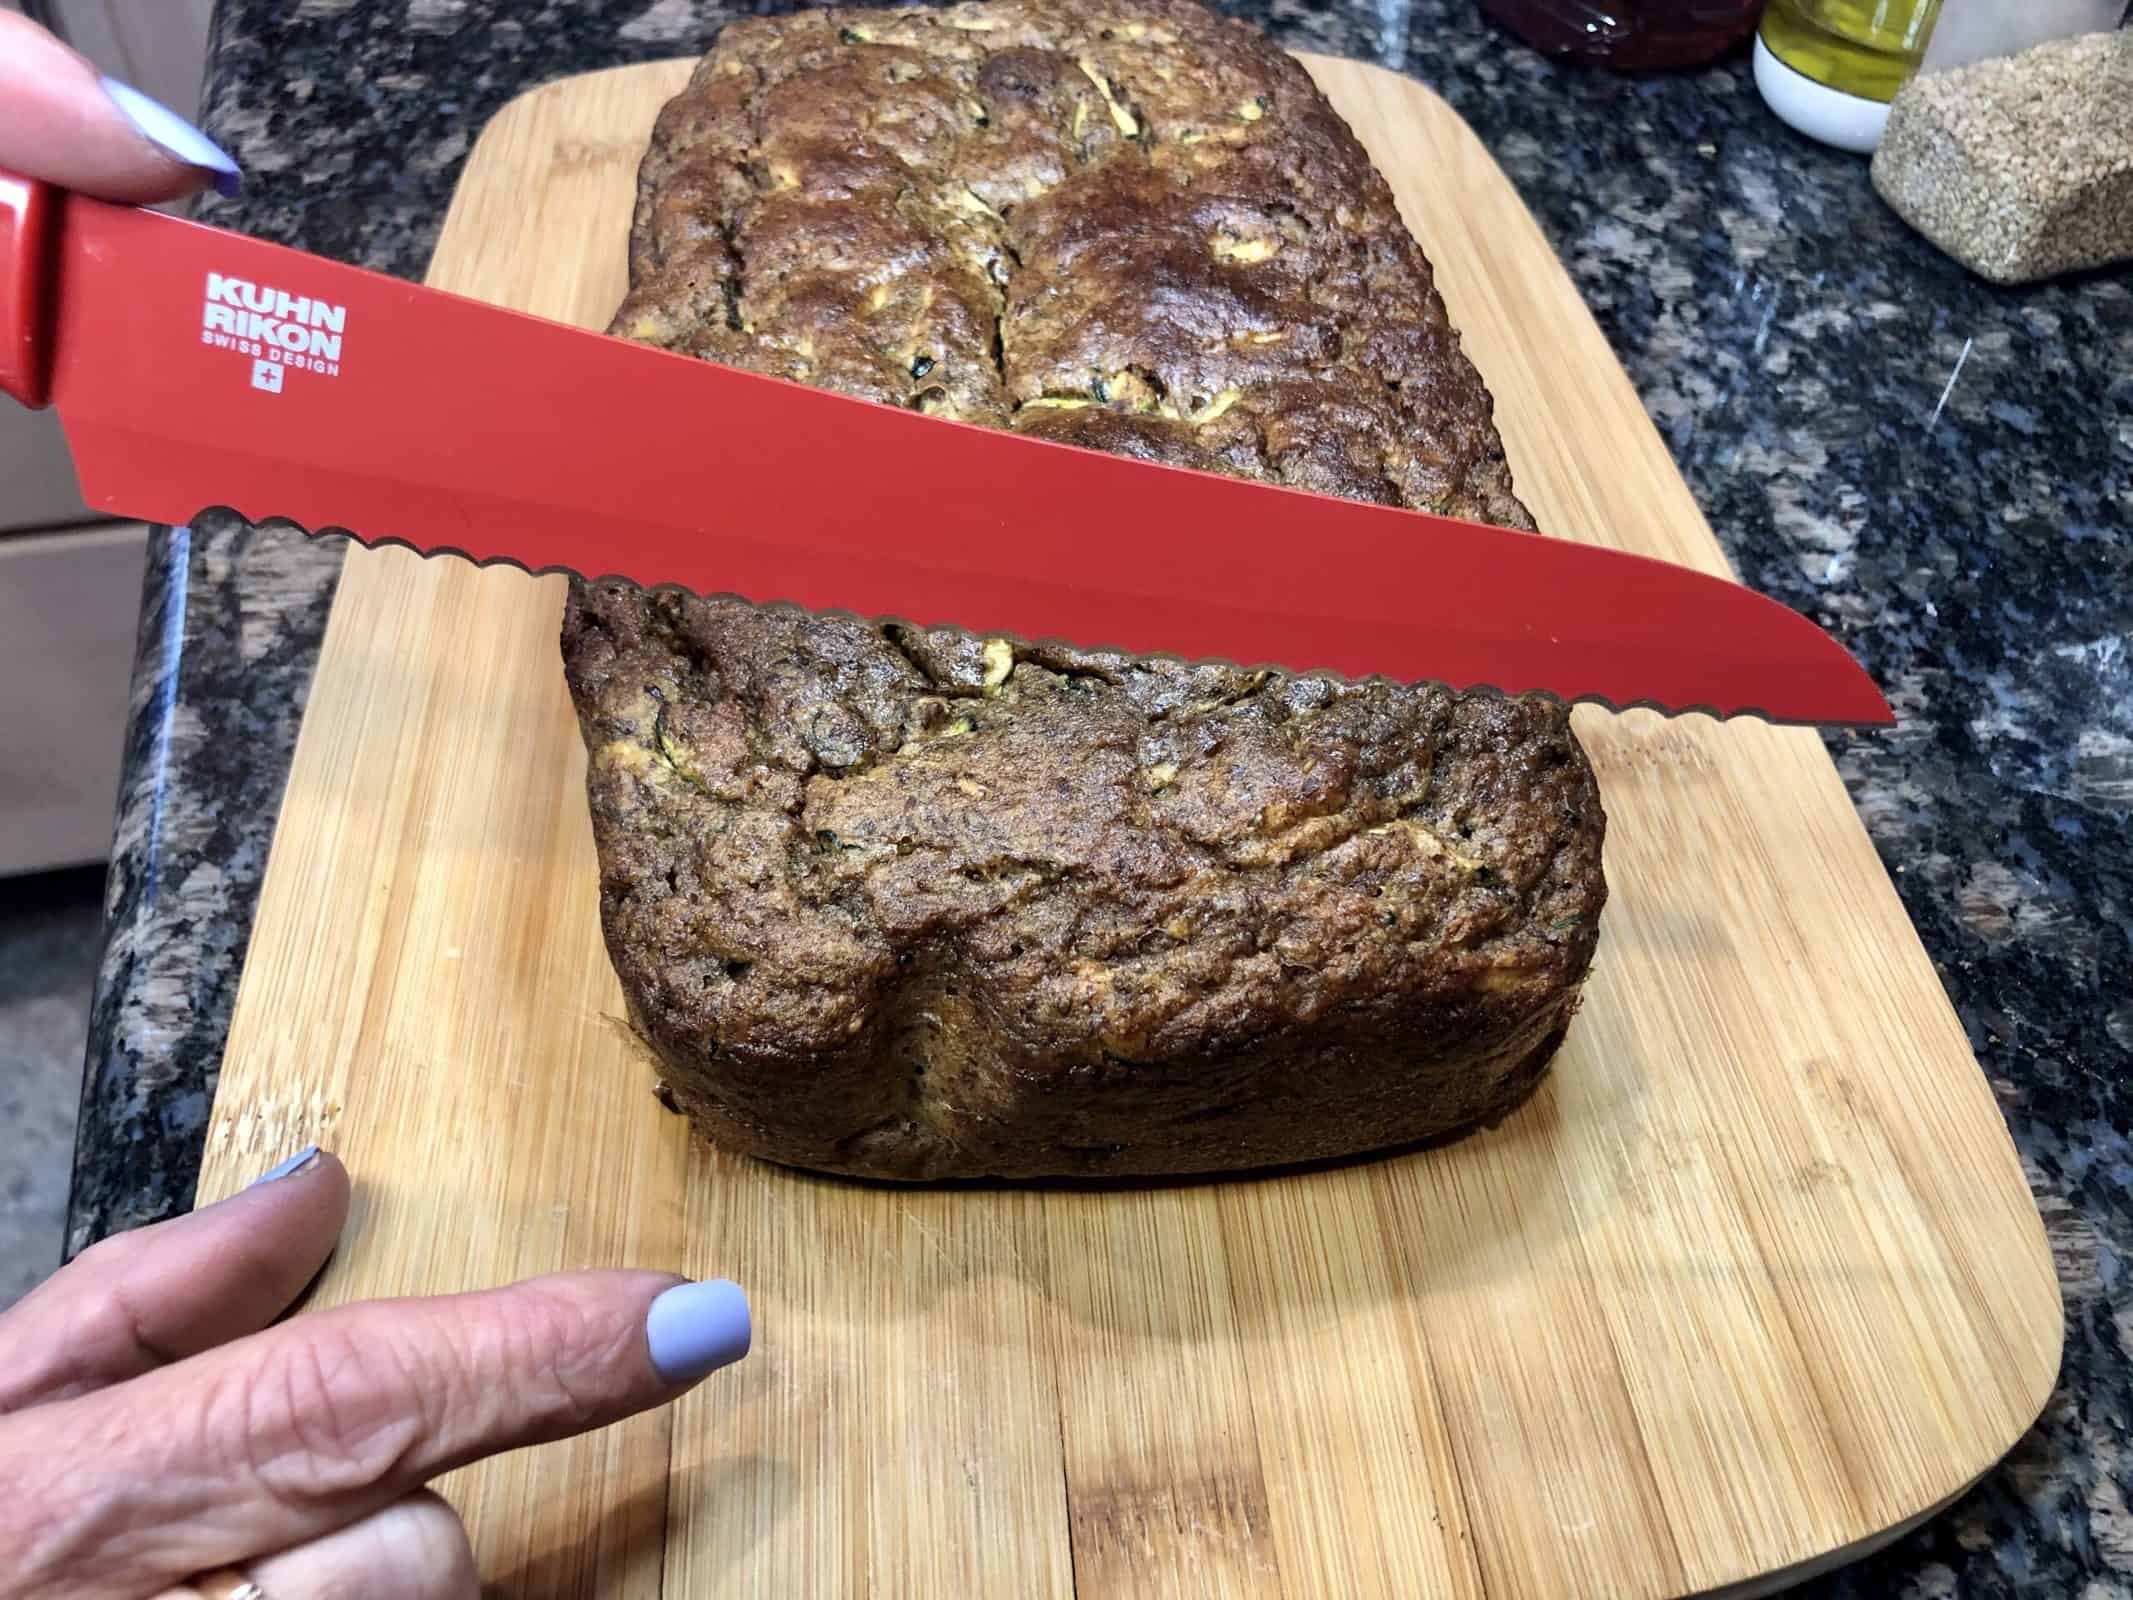 A loaf of Homemade Zucchini Bread on a wooden cutting board about to be sliced with a red knife